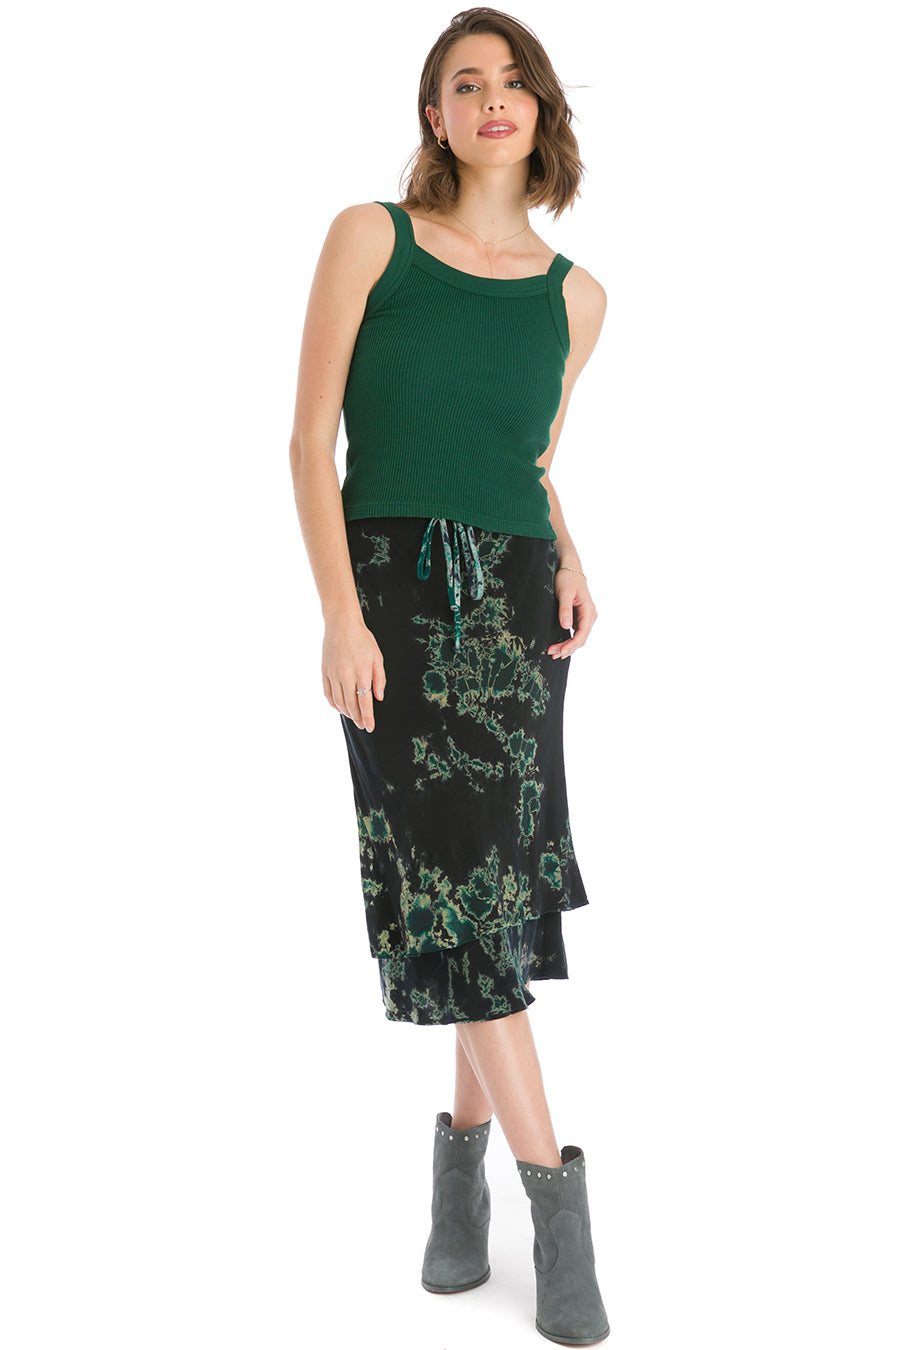 Hard Tail Forever Double Layer Bias Skirt - Two Color Iceberg 2 - L